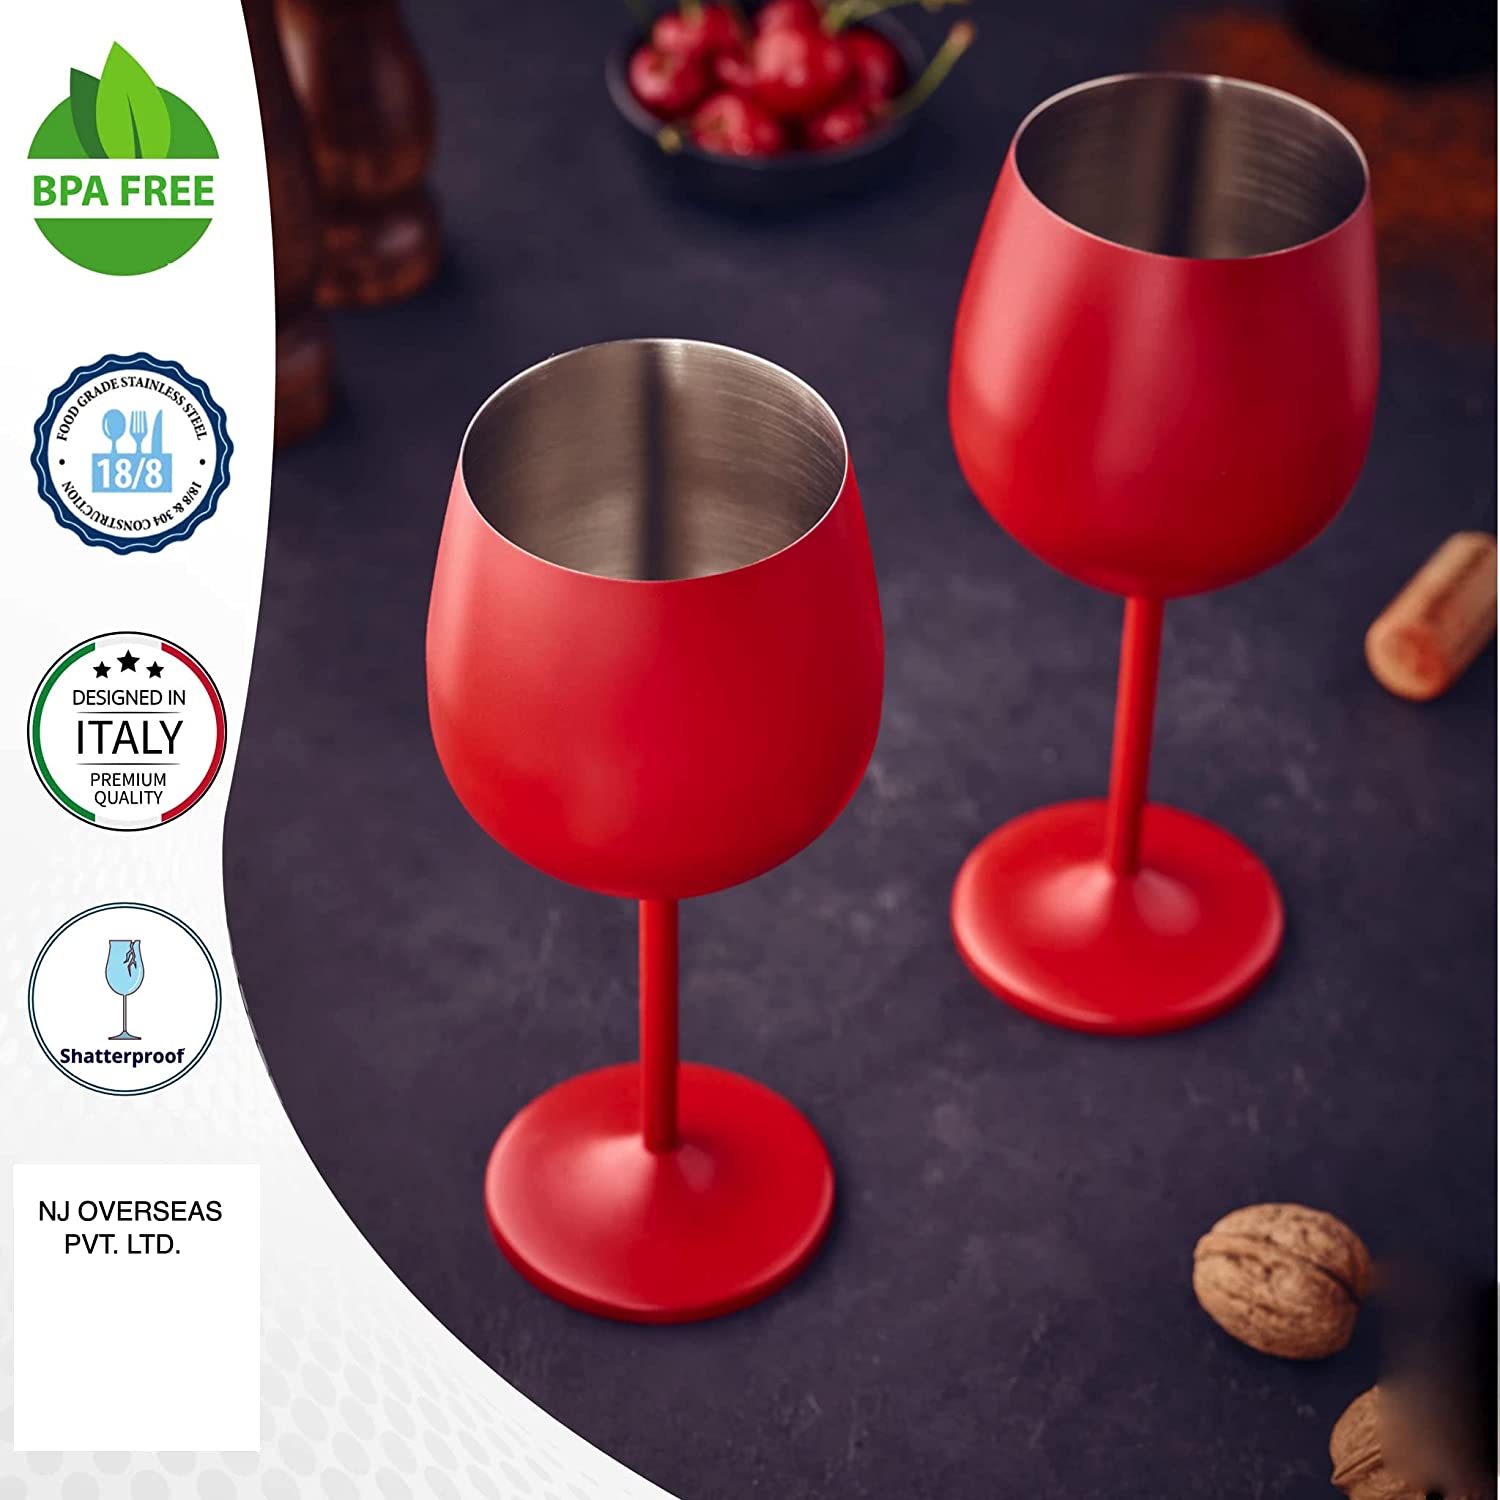 NJ Red Wine Glasses, Shatter Proof Red Coated Steel Unbreakable Wine Glass Goblets, Gift for Men and Women, Party Supplies - 350 ml: Set of 6 Pcs